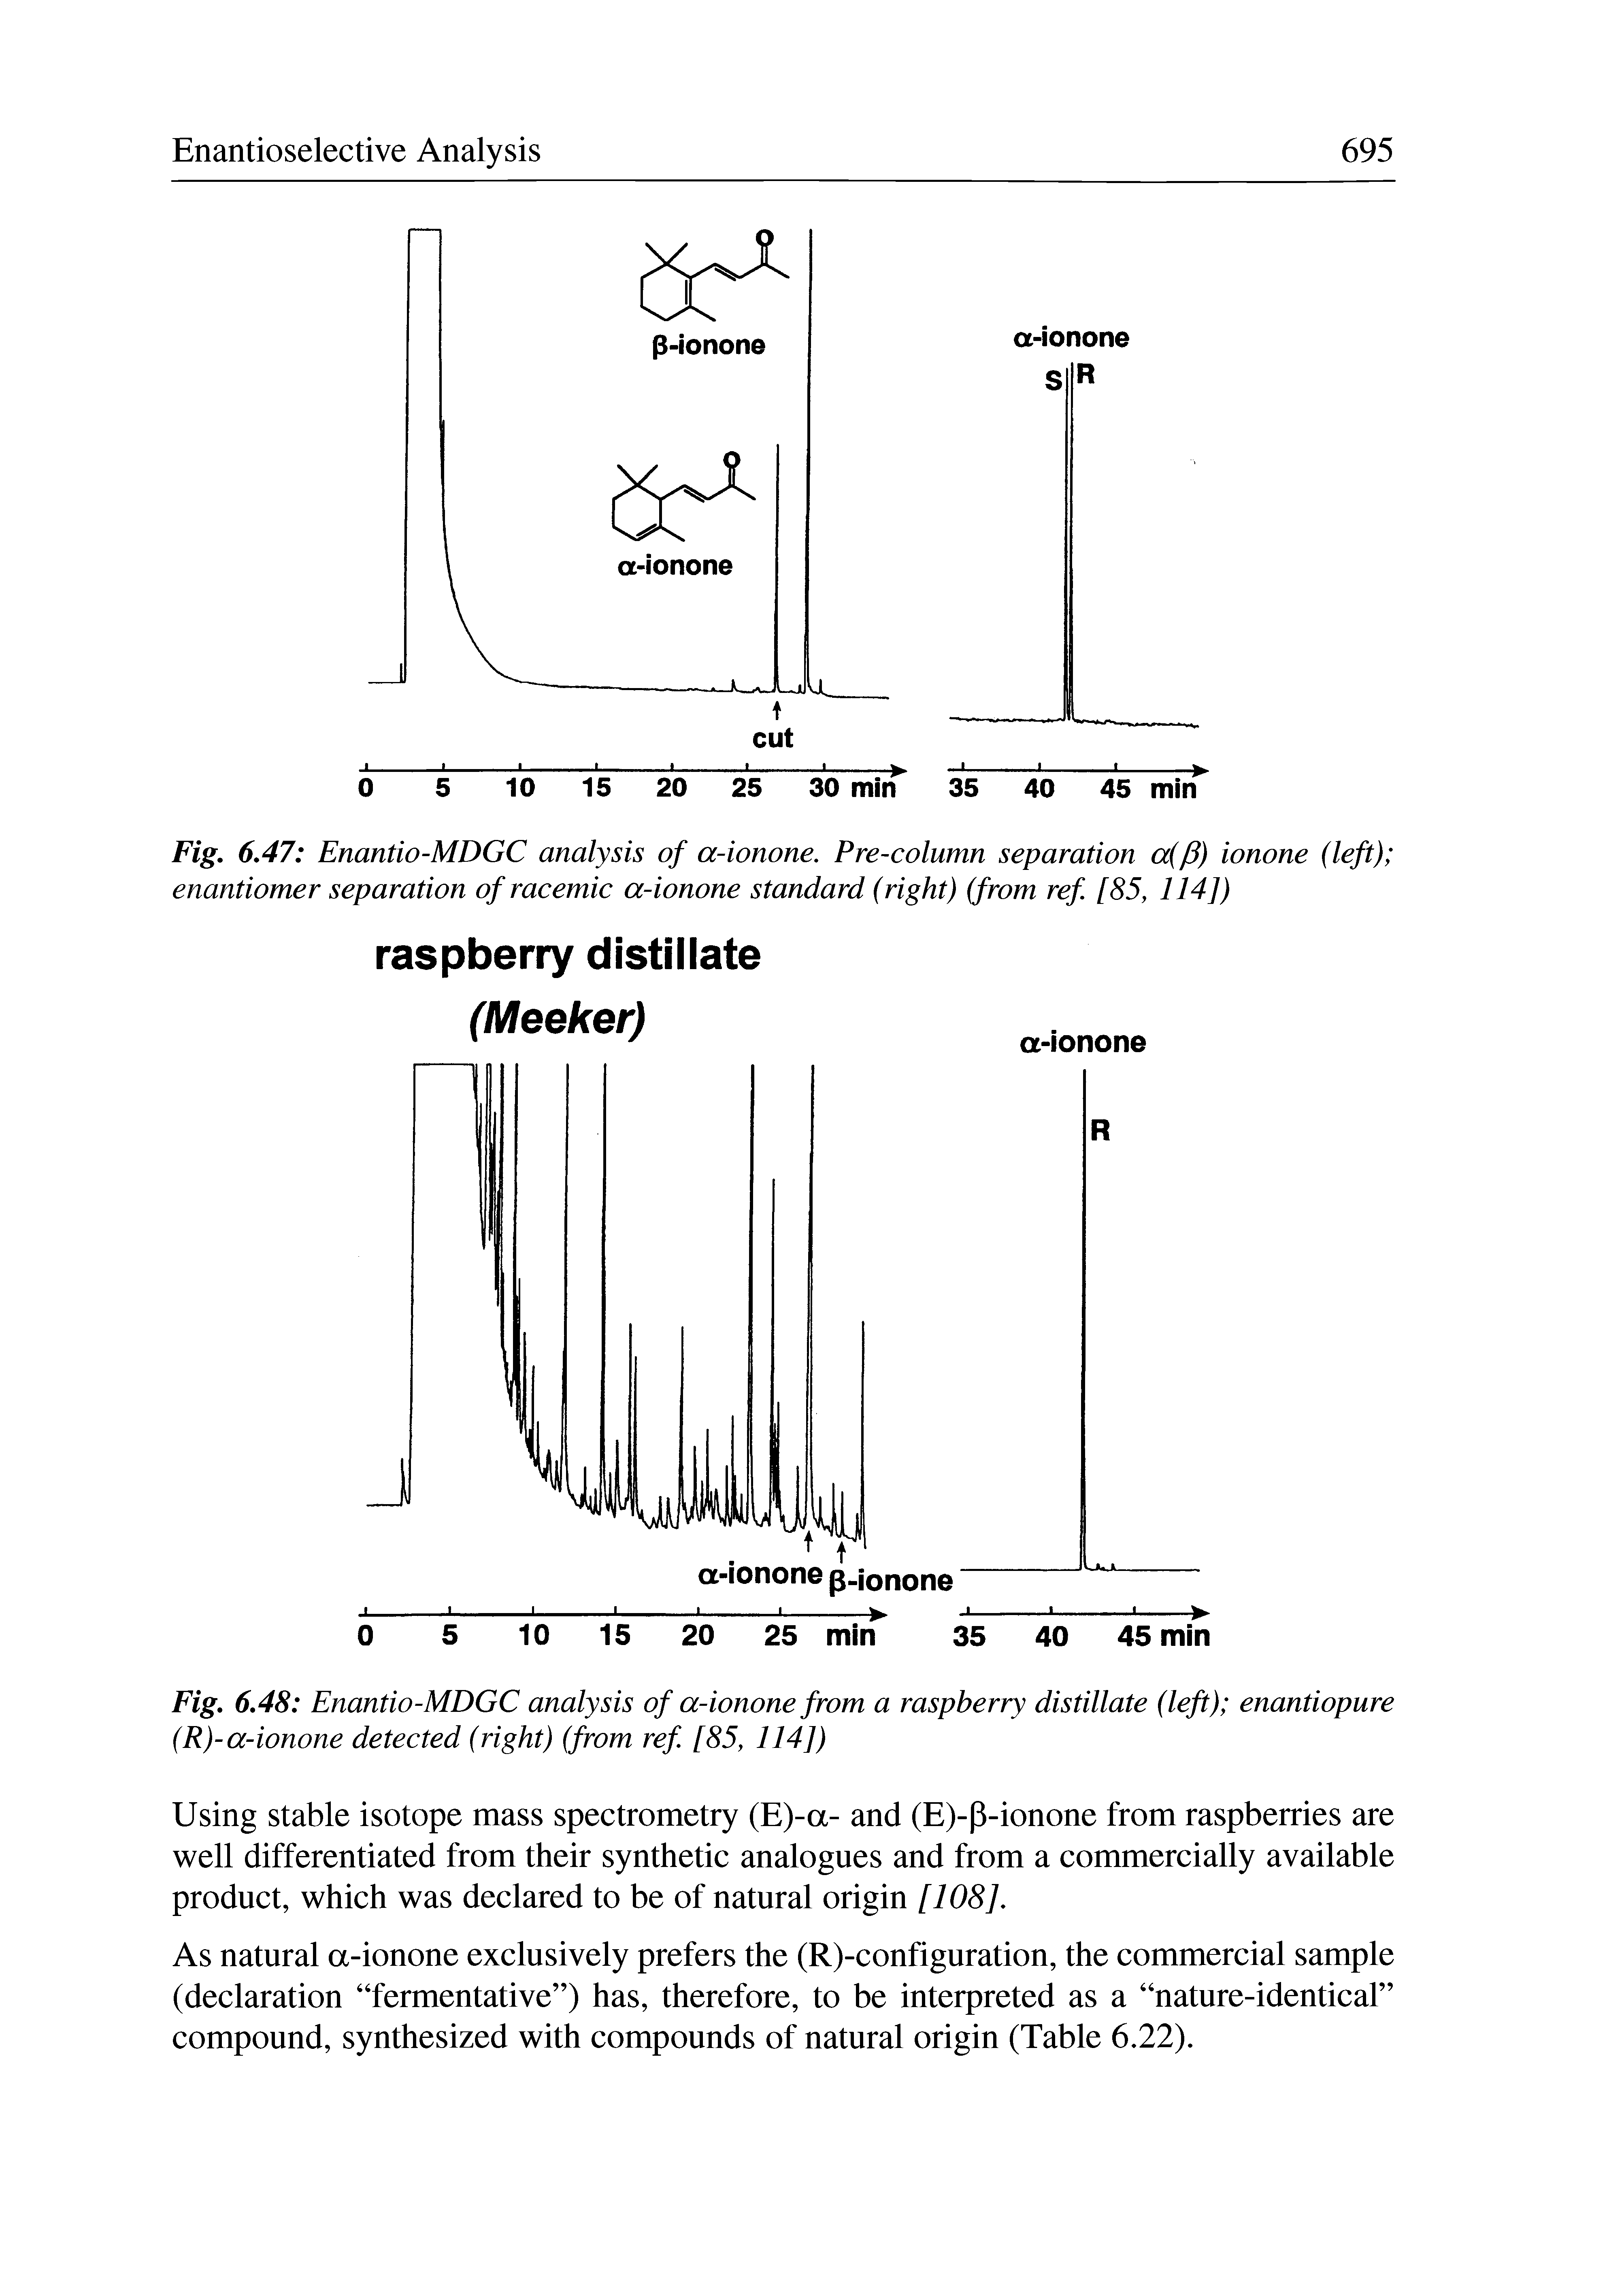 Fig. 6.47 Enantio-MDGC analysis of a-ionone. Pre-column separation a(P) ionone (left) enantiomer separation of racemic a-ionone standard (right) (from ref [85, 114])...